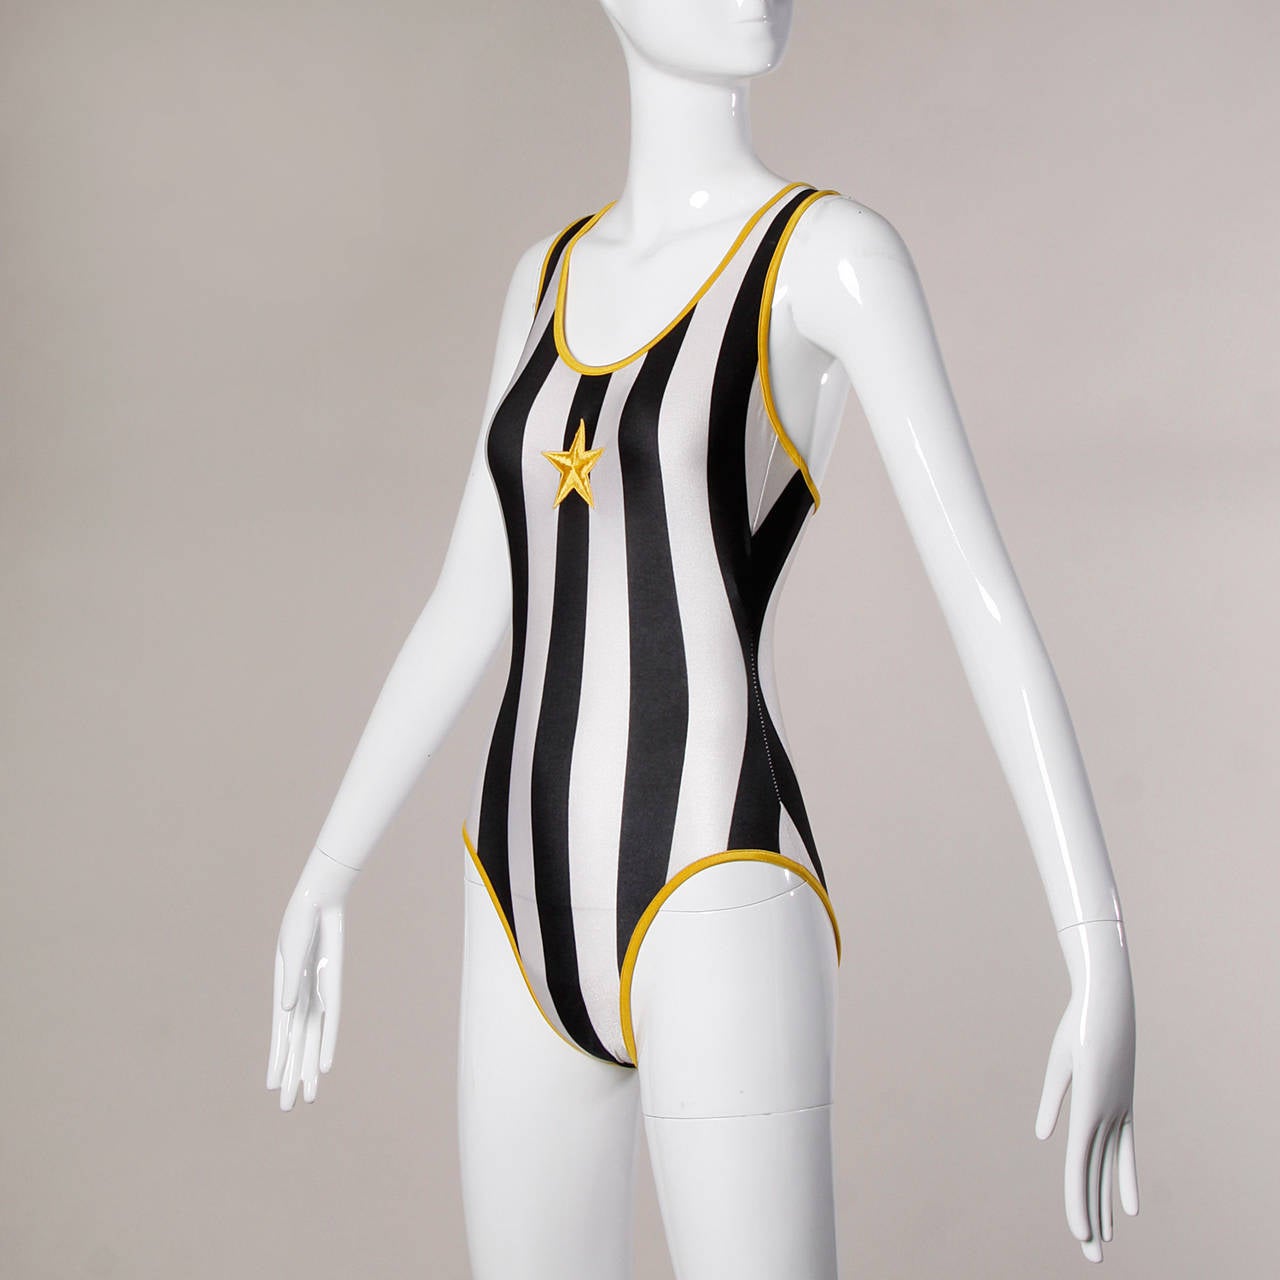 Women's 1996 Iconic OMO Norma Kamali Body Suit as Worn in the Movie Clueless